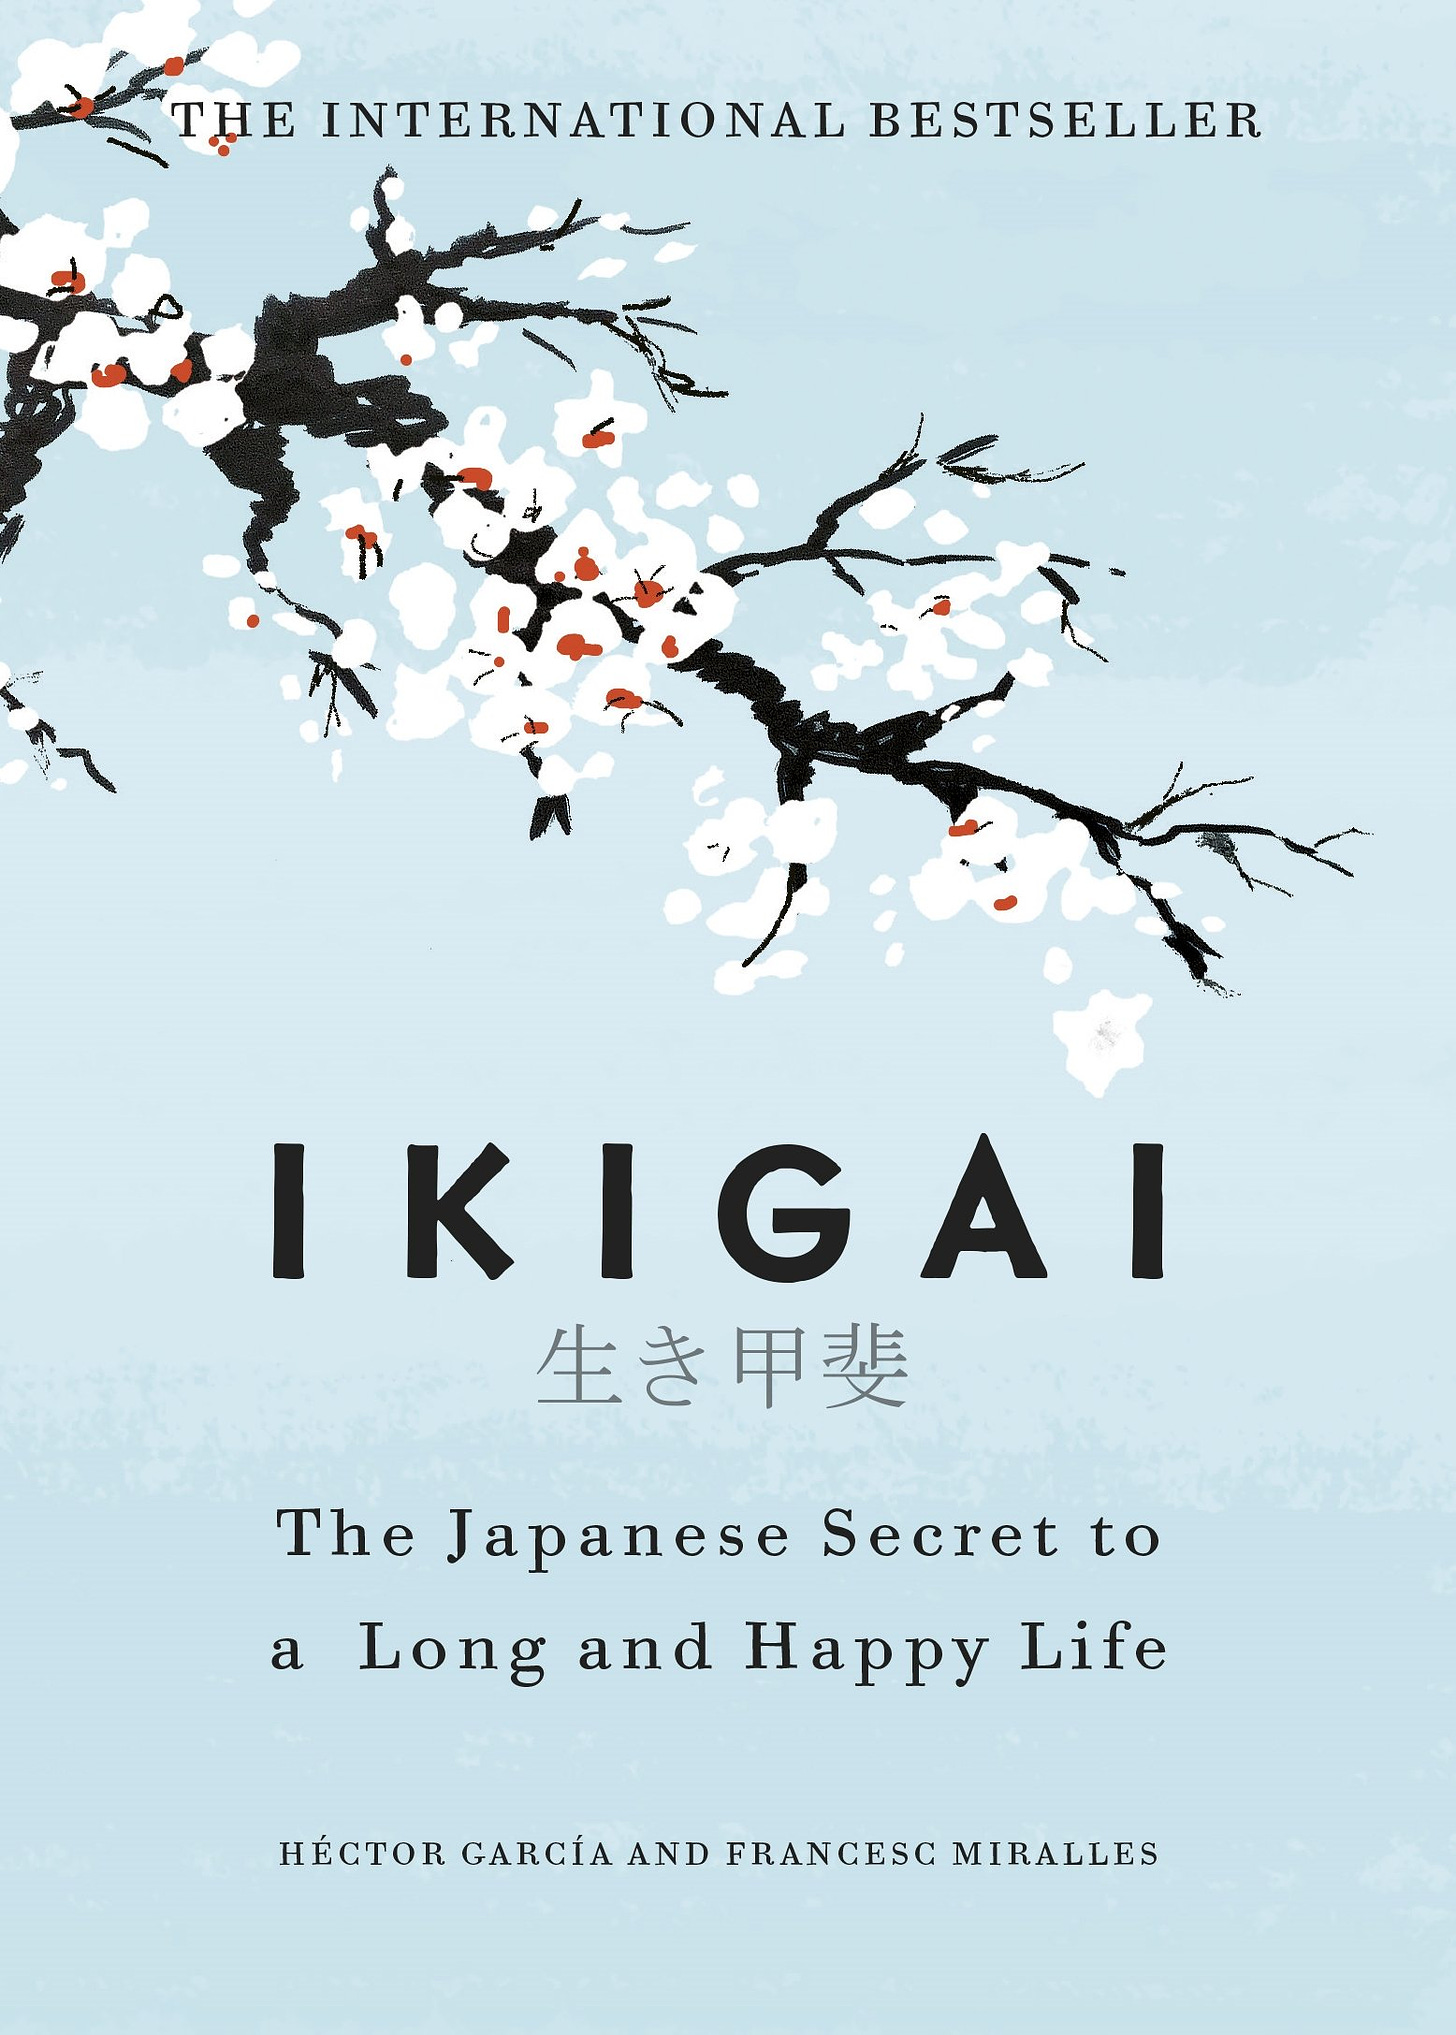 Ikigai - The Secret To Long and Happy Life